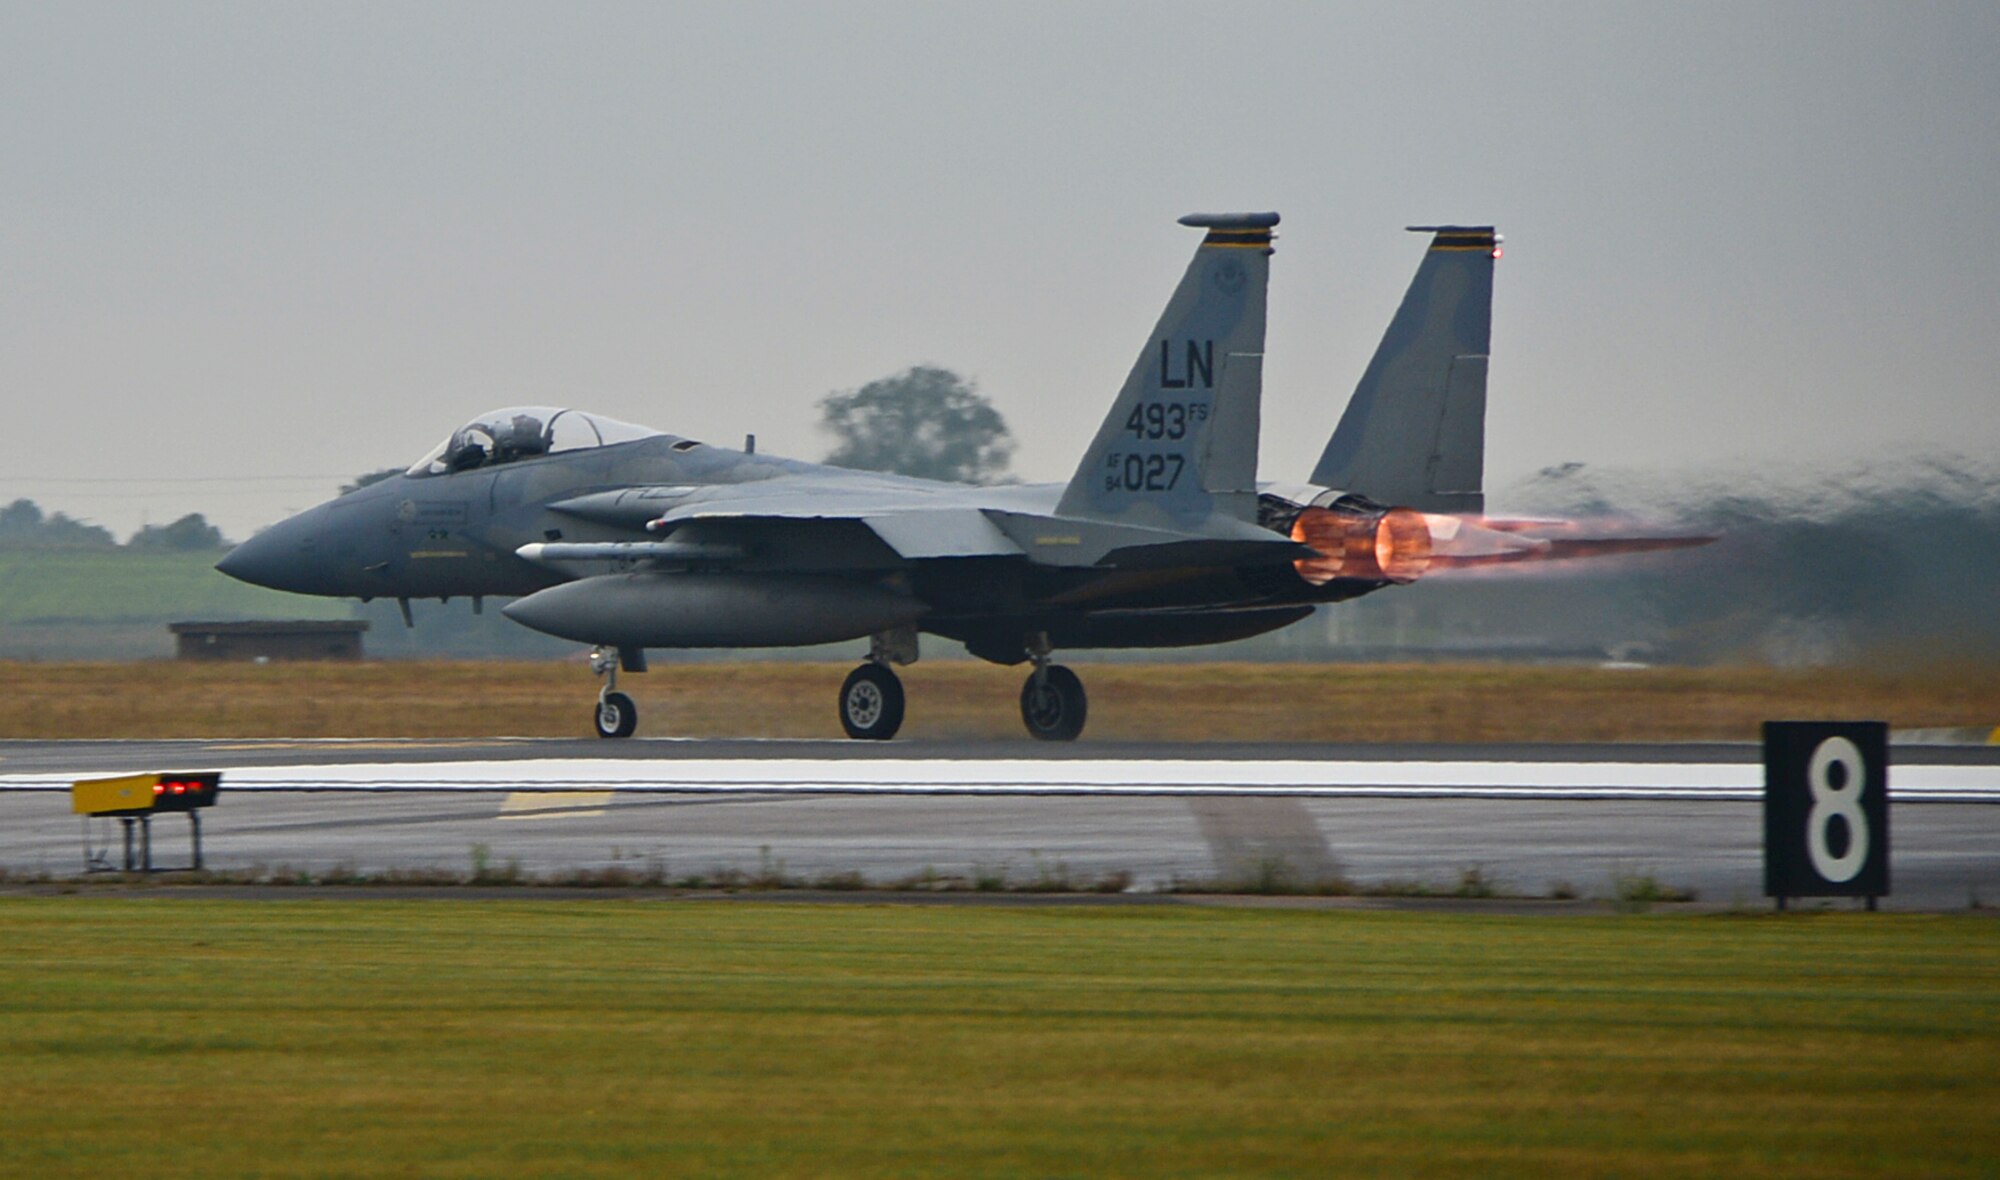 A 493rd Fighter Squadron F-15C Eagle takes off  from Royal Air Force Lakenheath, England, Aug. 15, 2014, for bilateral training at Graf Ignatievo Air Base, Bulgaria. The F-15 fighter pilots’ flying training deployment to Bulgaria focuses on maintaining joint readiness while building interoperability capabilities. (U.S. Air Force photo by Airman 1st Class Erin O’Shea/Released)